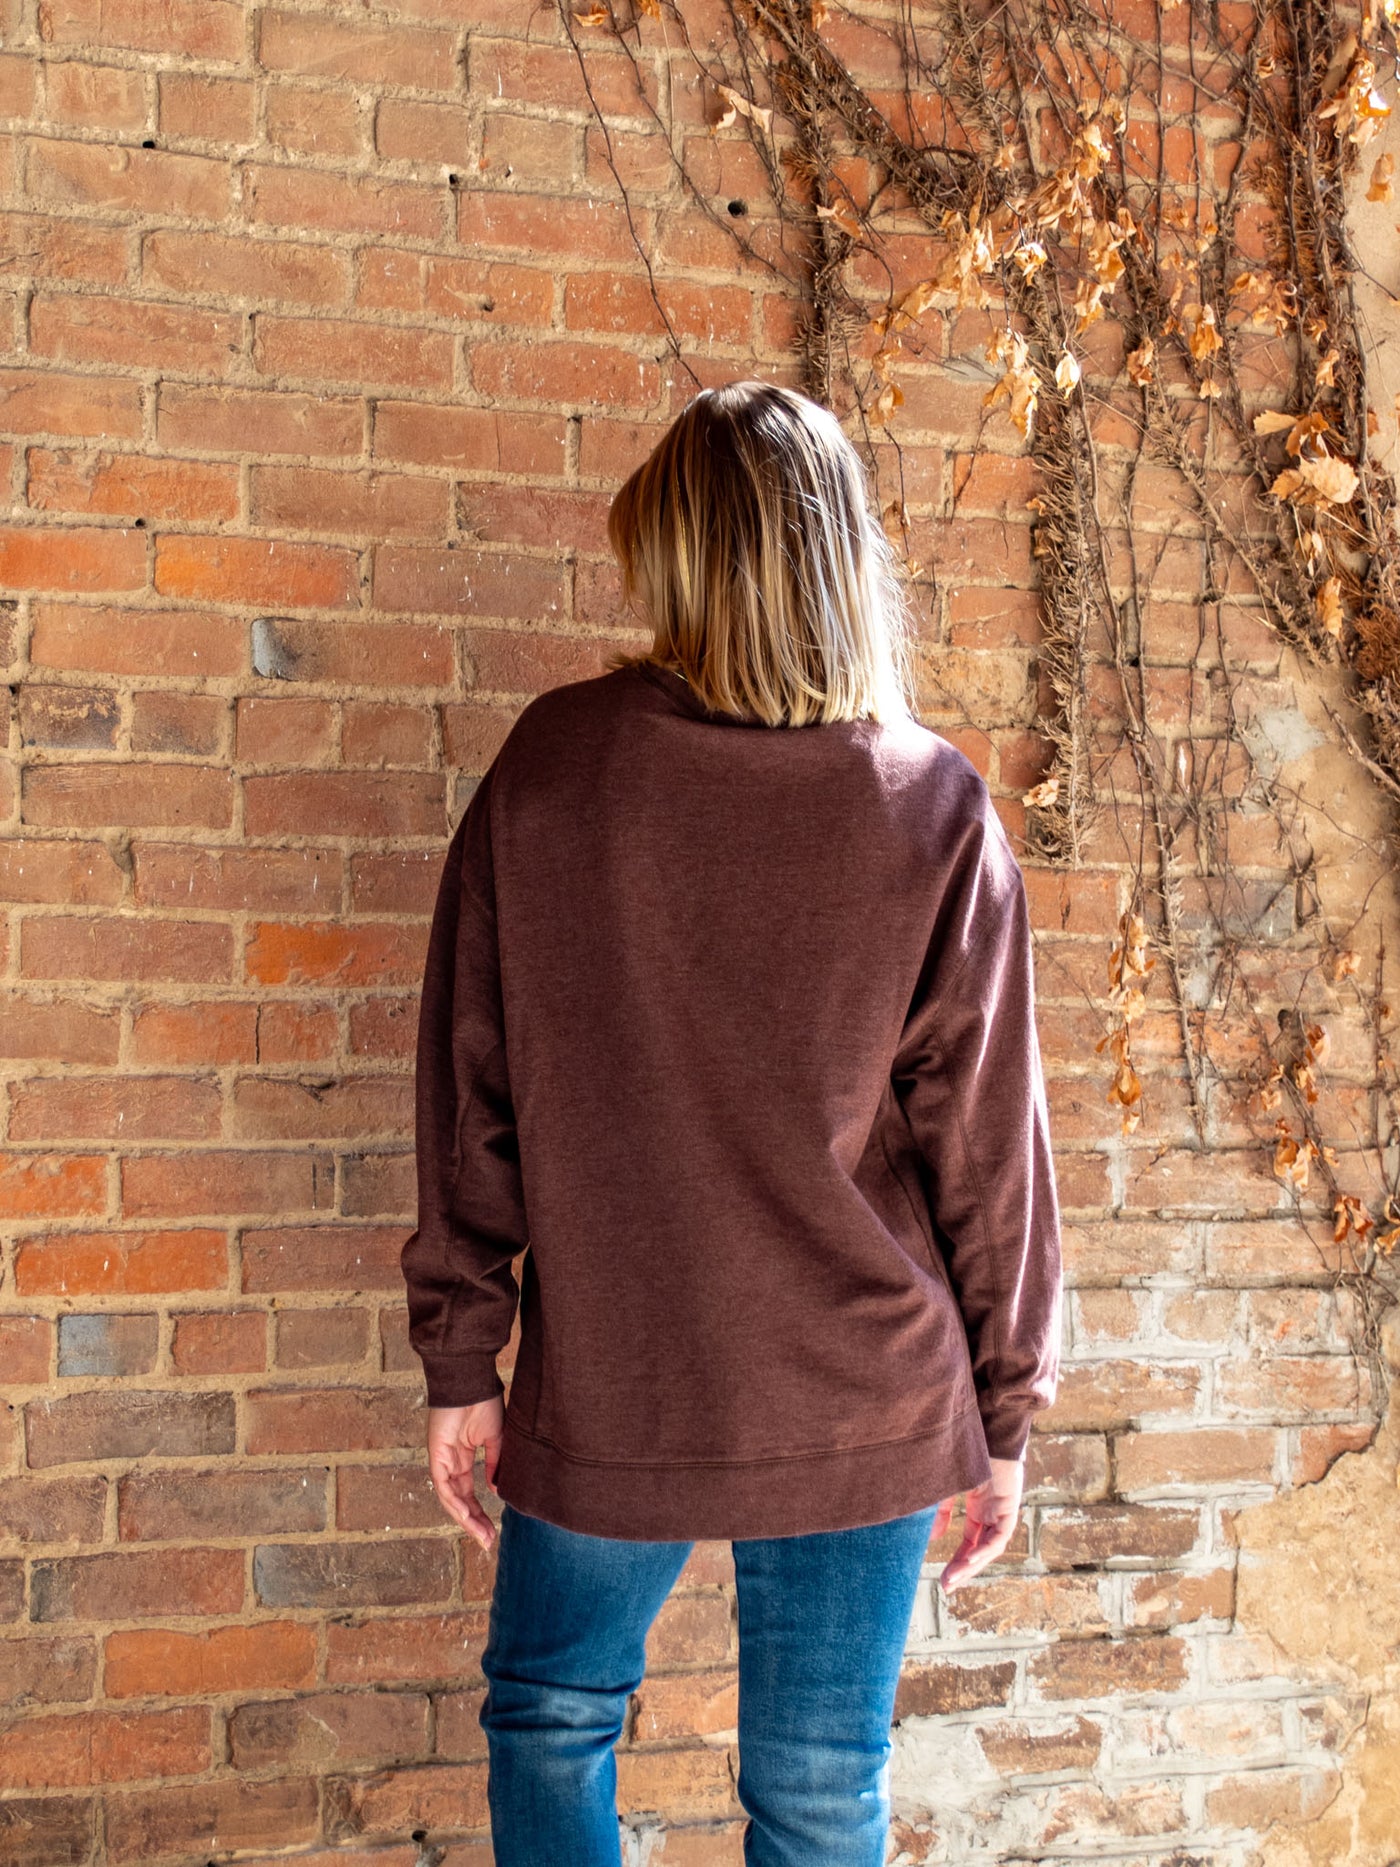 A model wearing a maroon crewneck sweatshirt. The model has it paired with a medium wash skinny jean.